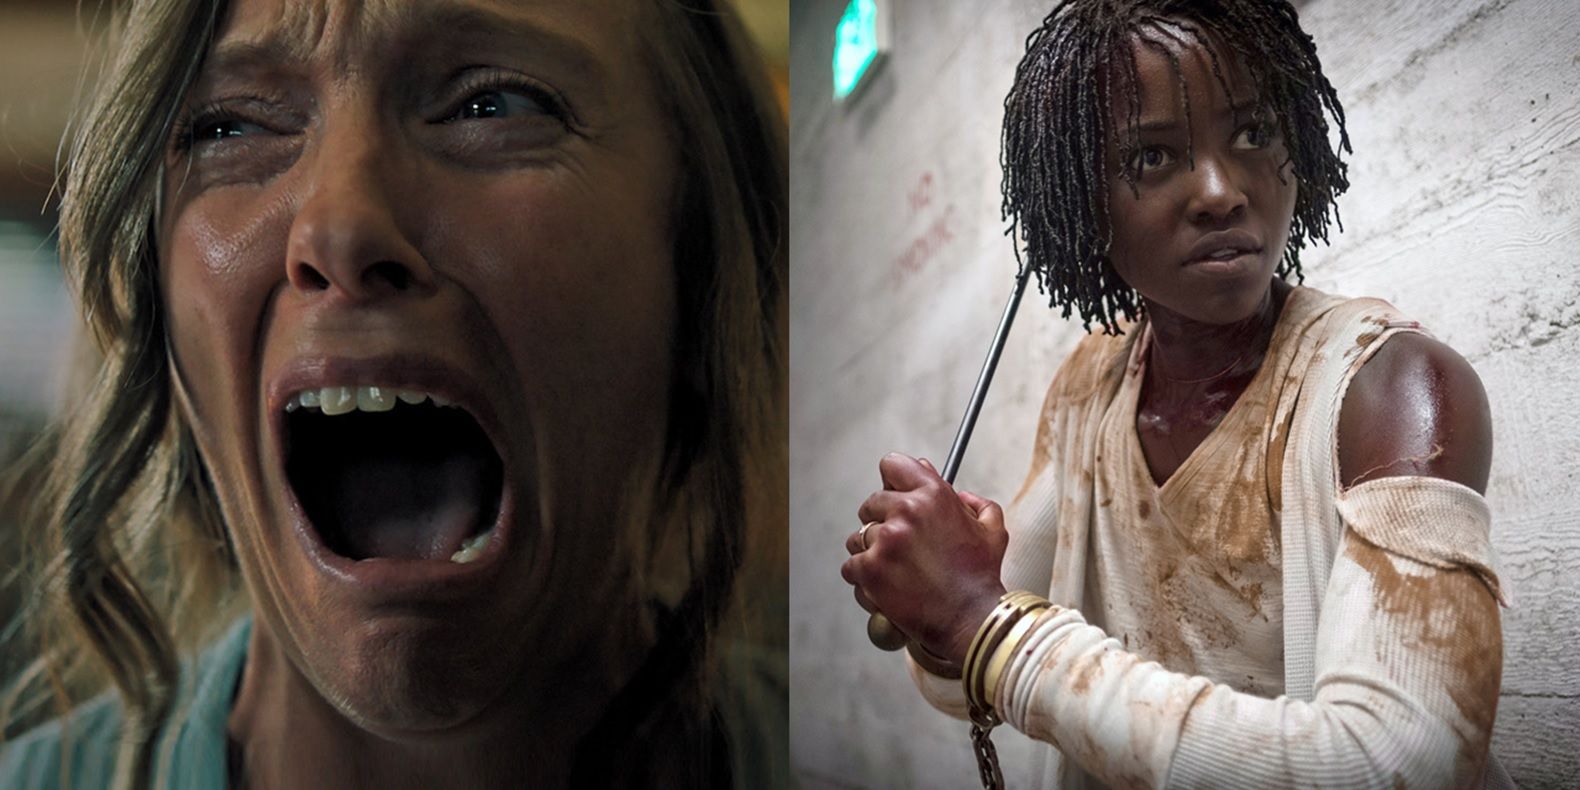 Split image of Toni Collette screaming in Hereditary and Lupita Nyong'o holding a fire poker in Us.